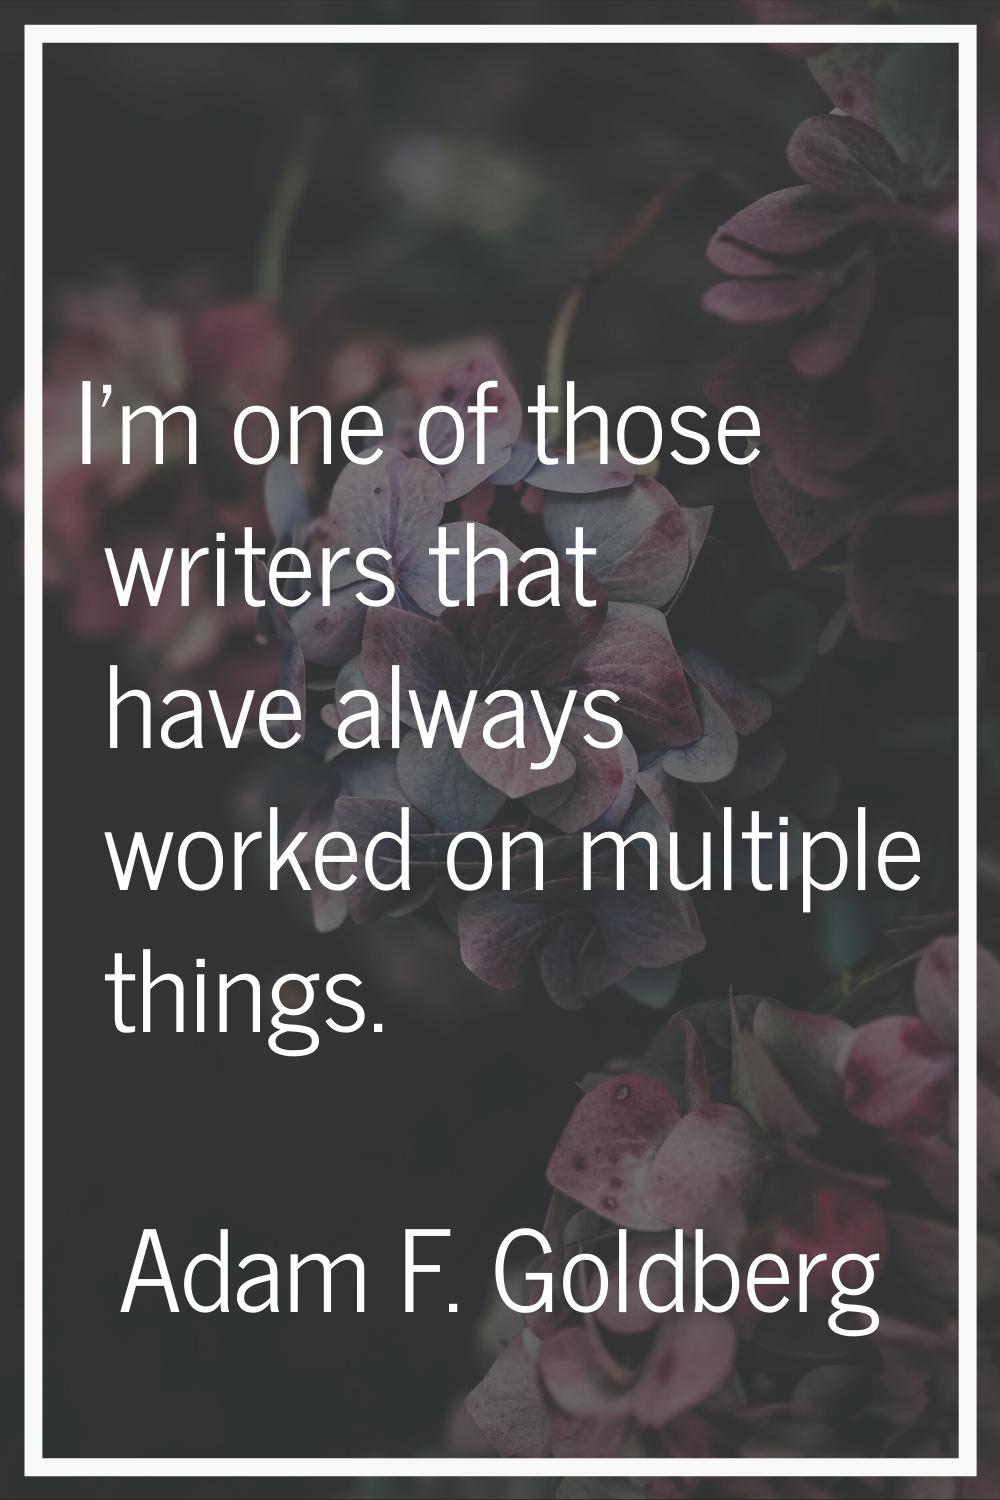 I'm one of those writers that have always worked on multiple things.